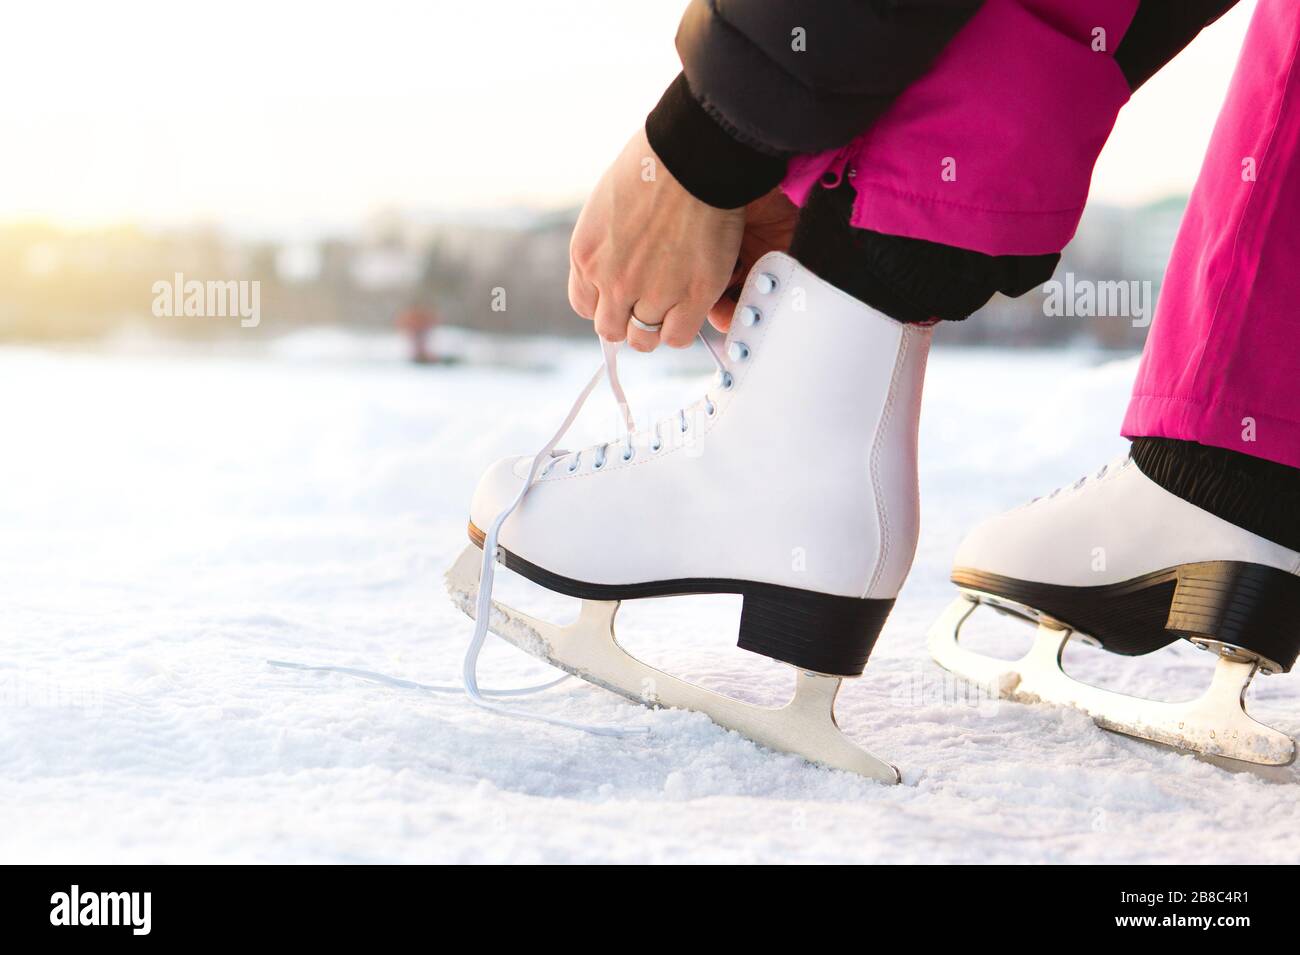 Woman tying ice skates laces by a lake or pond. Lacing iceskates. Skater about to exercise on an outdoor track or rink. Sunny winter weather. Stock Photo